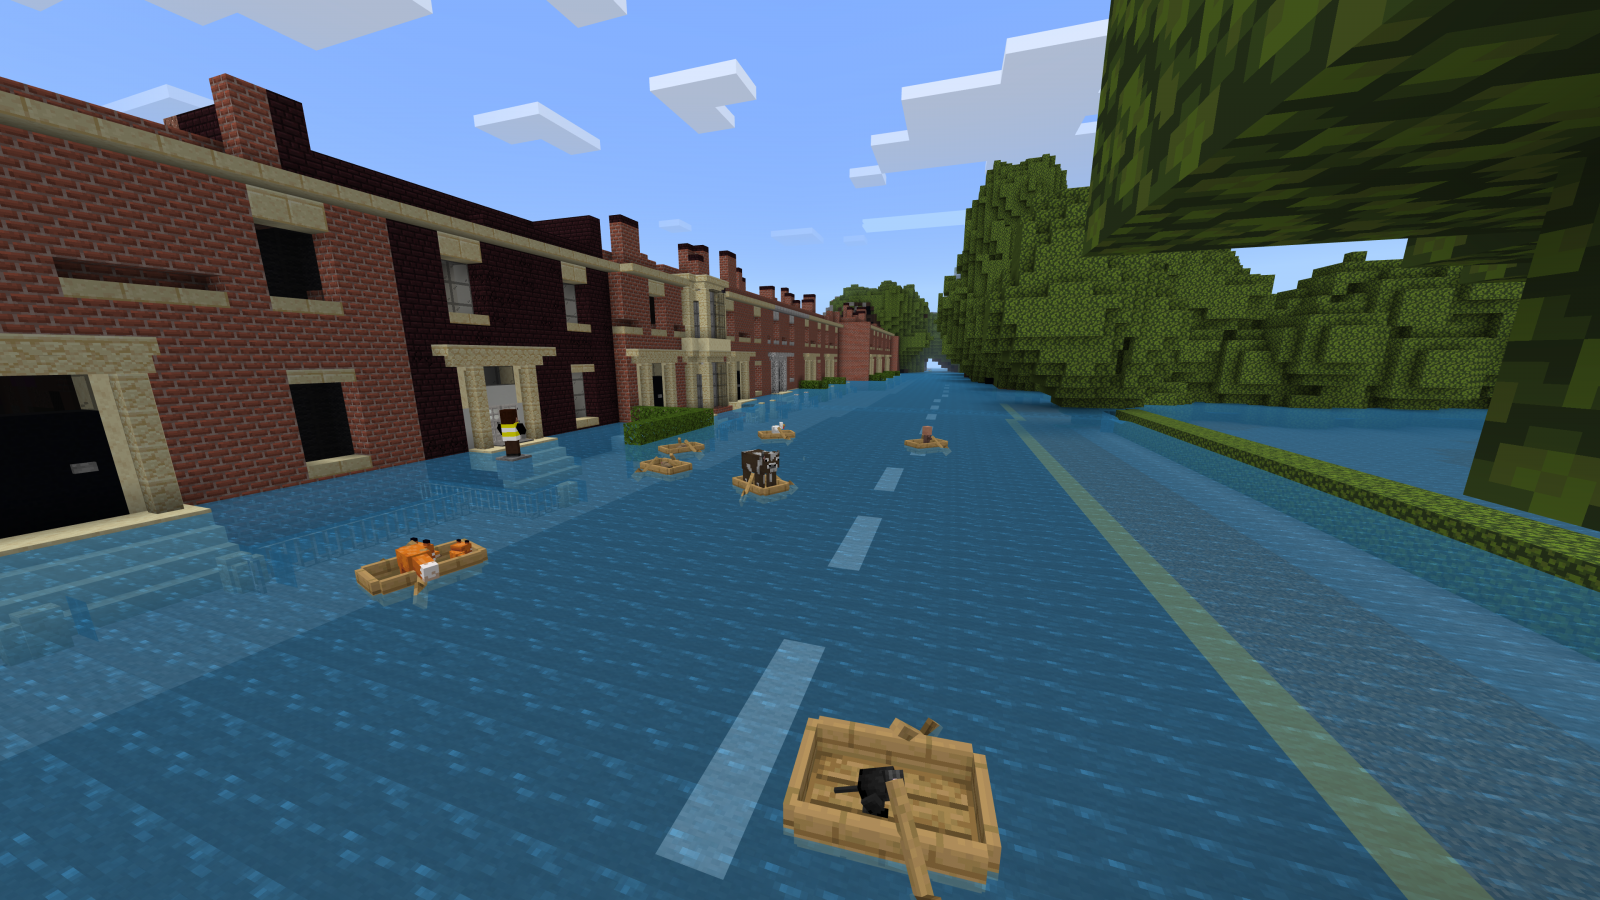 Is Minecraft Good for Your brain: Does it Make You Smarter?